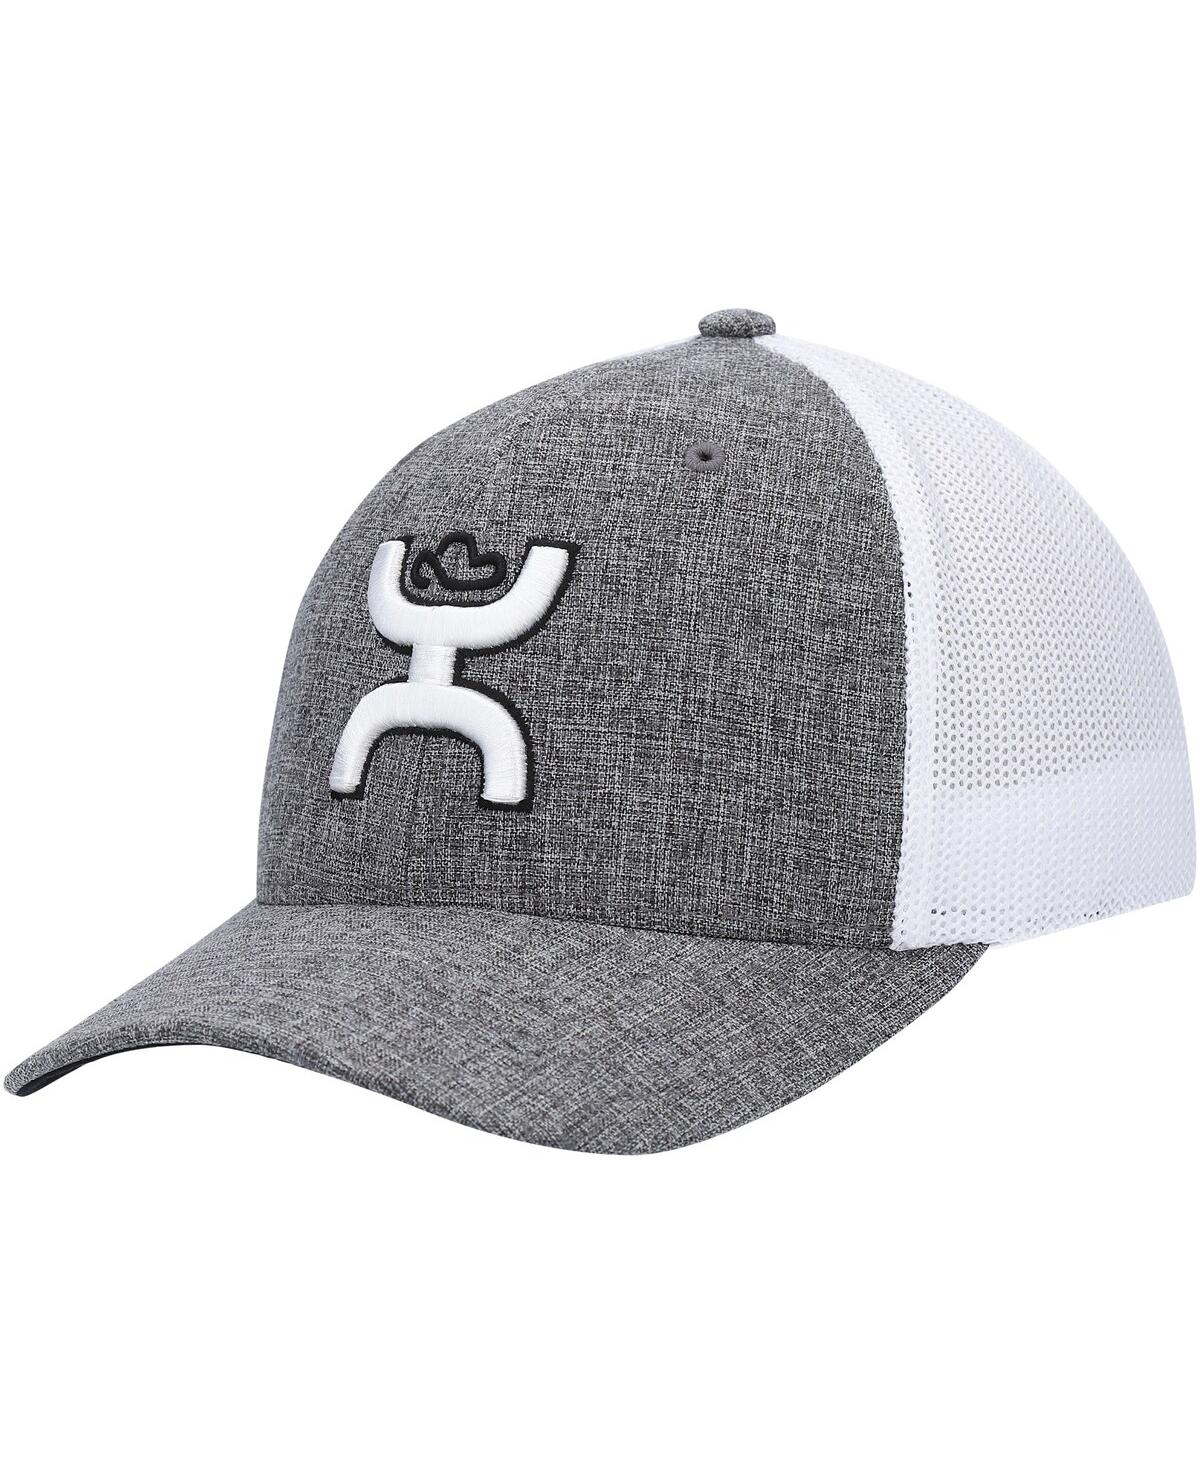 Hooey Men's  Heather Charcoal, White Cayman Flex Hat In Heathered Charcoal,white